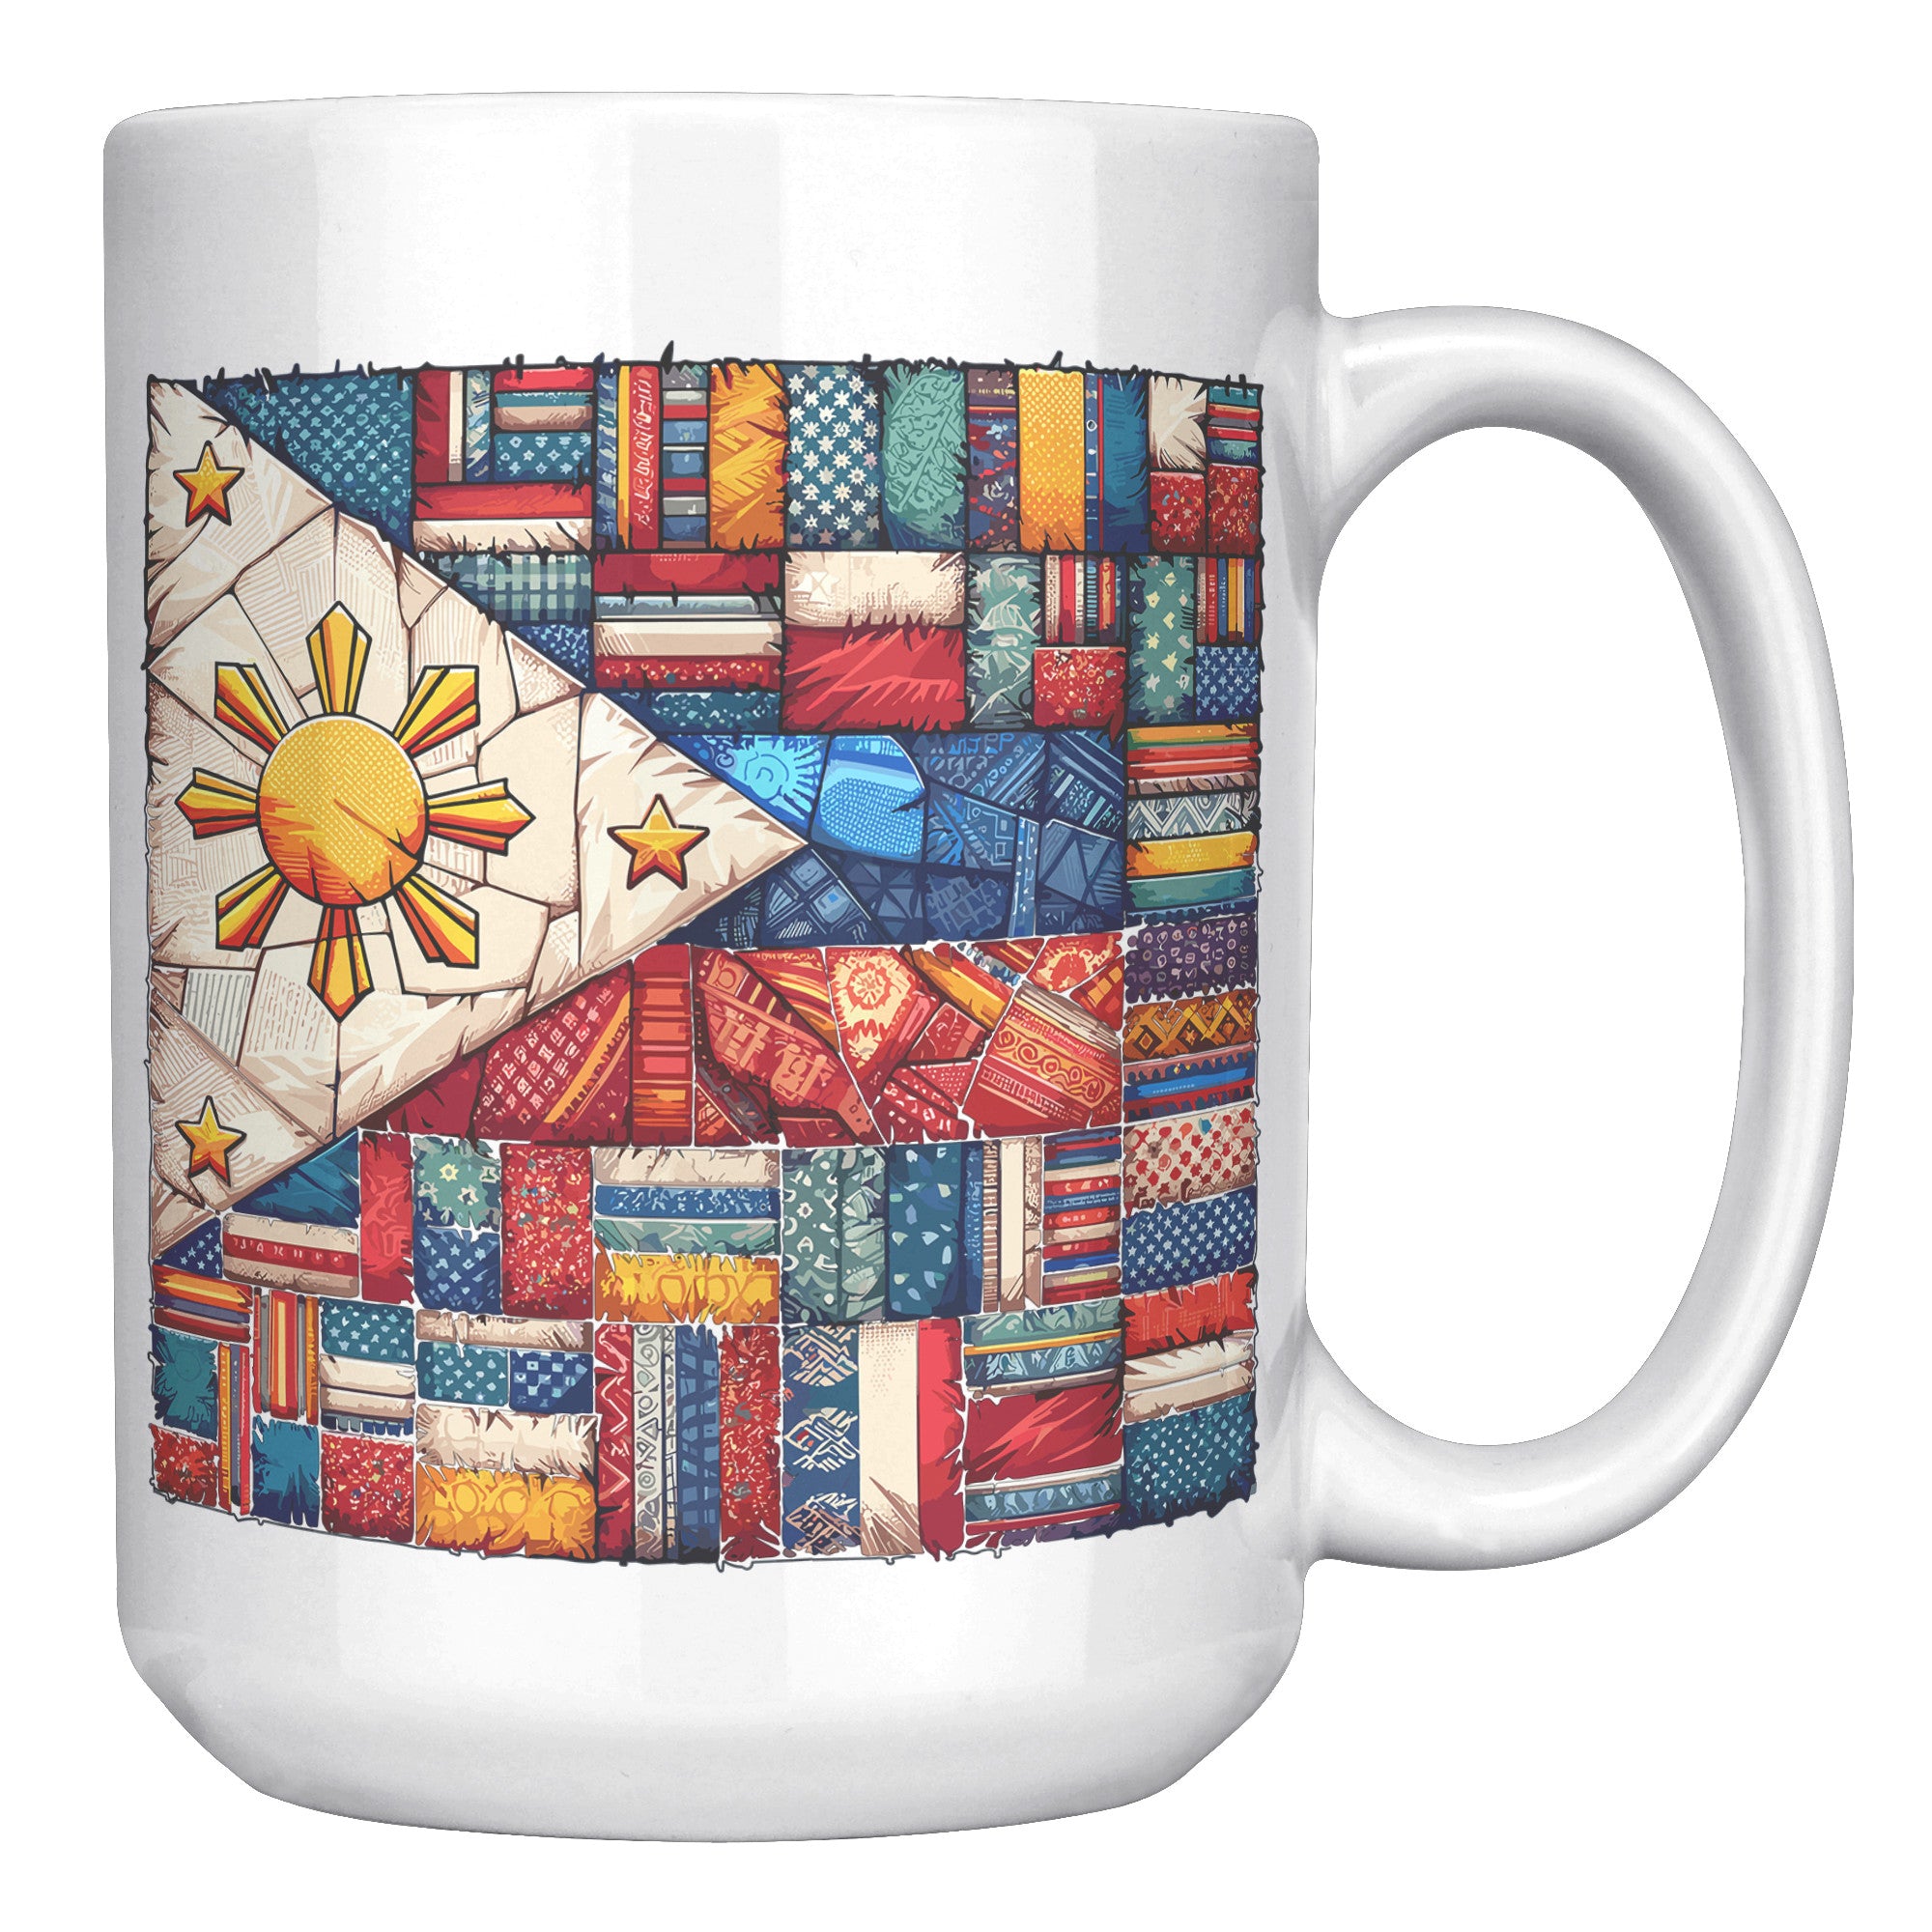 Proudly Pinoy Coffee Mug - Vibrant Filipino Flag Design - Patriotic Gift for Filipinos - Celebrate Heritage with Every Sip!" - G1